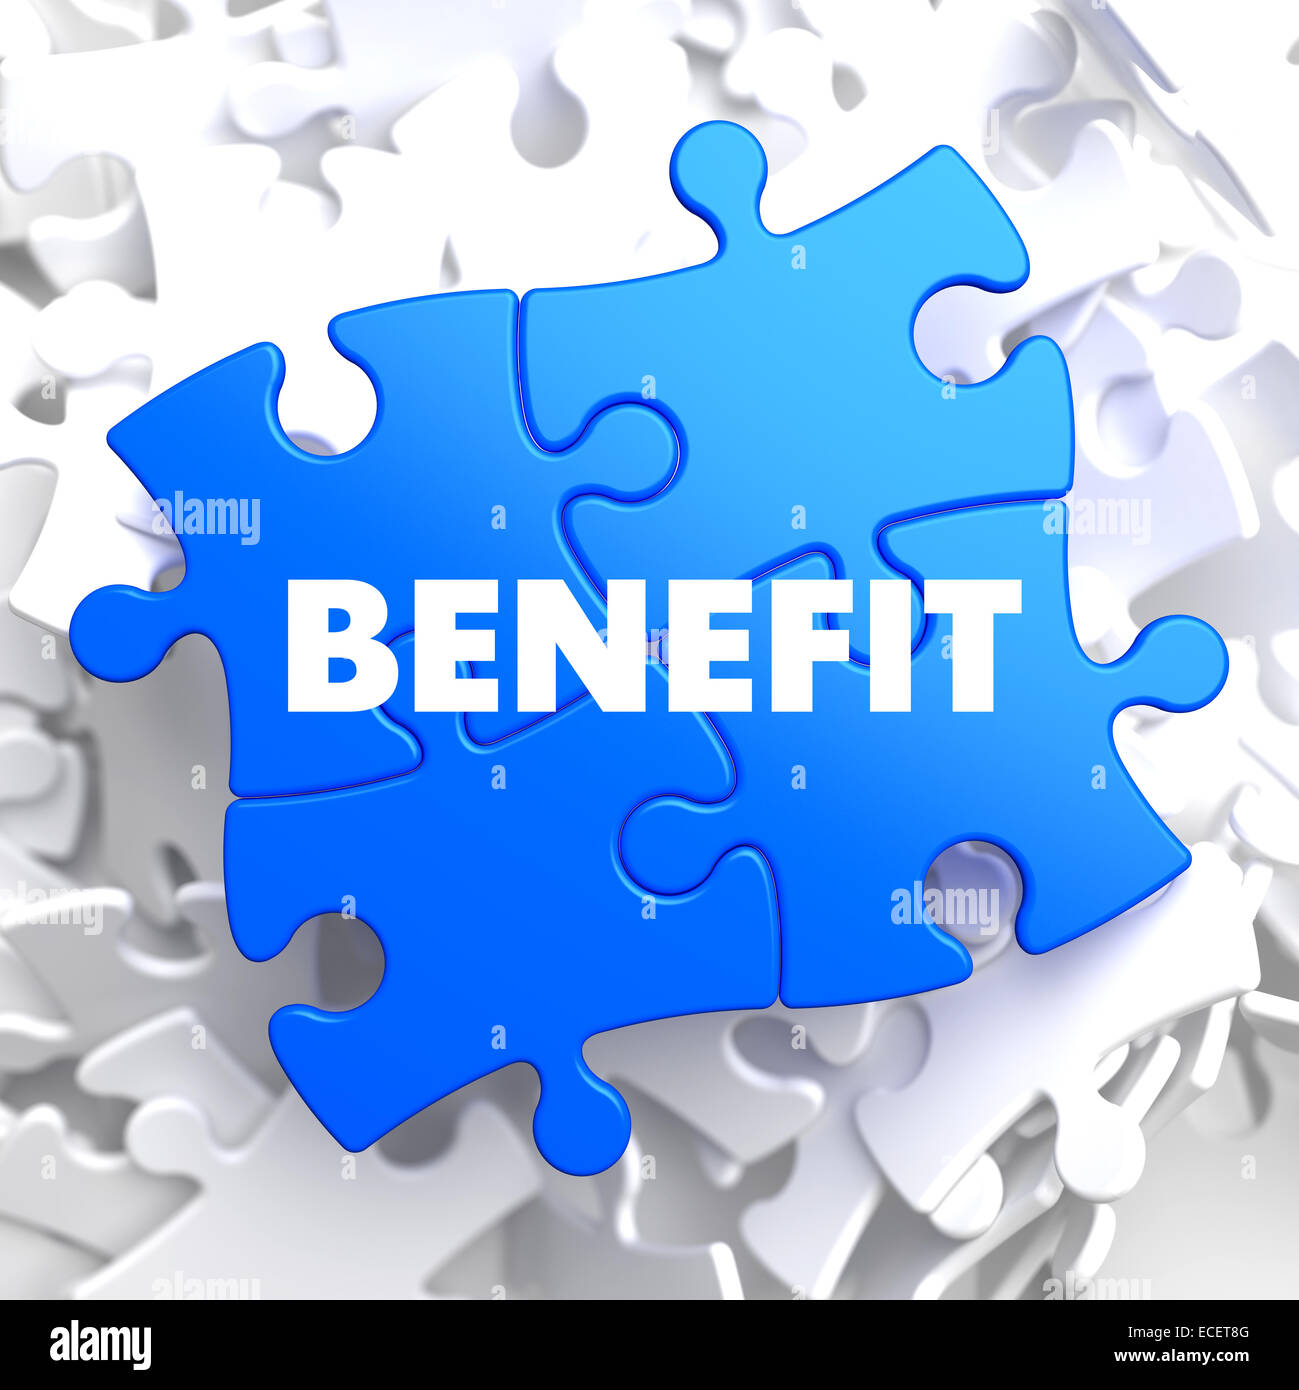 Benefit on Blue Puzzle. Stock Photo